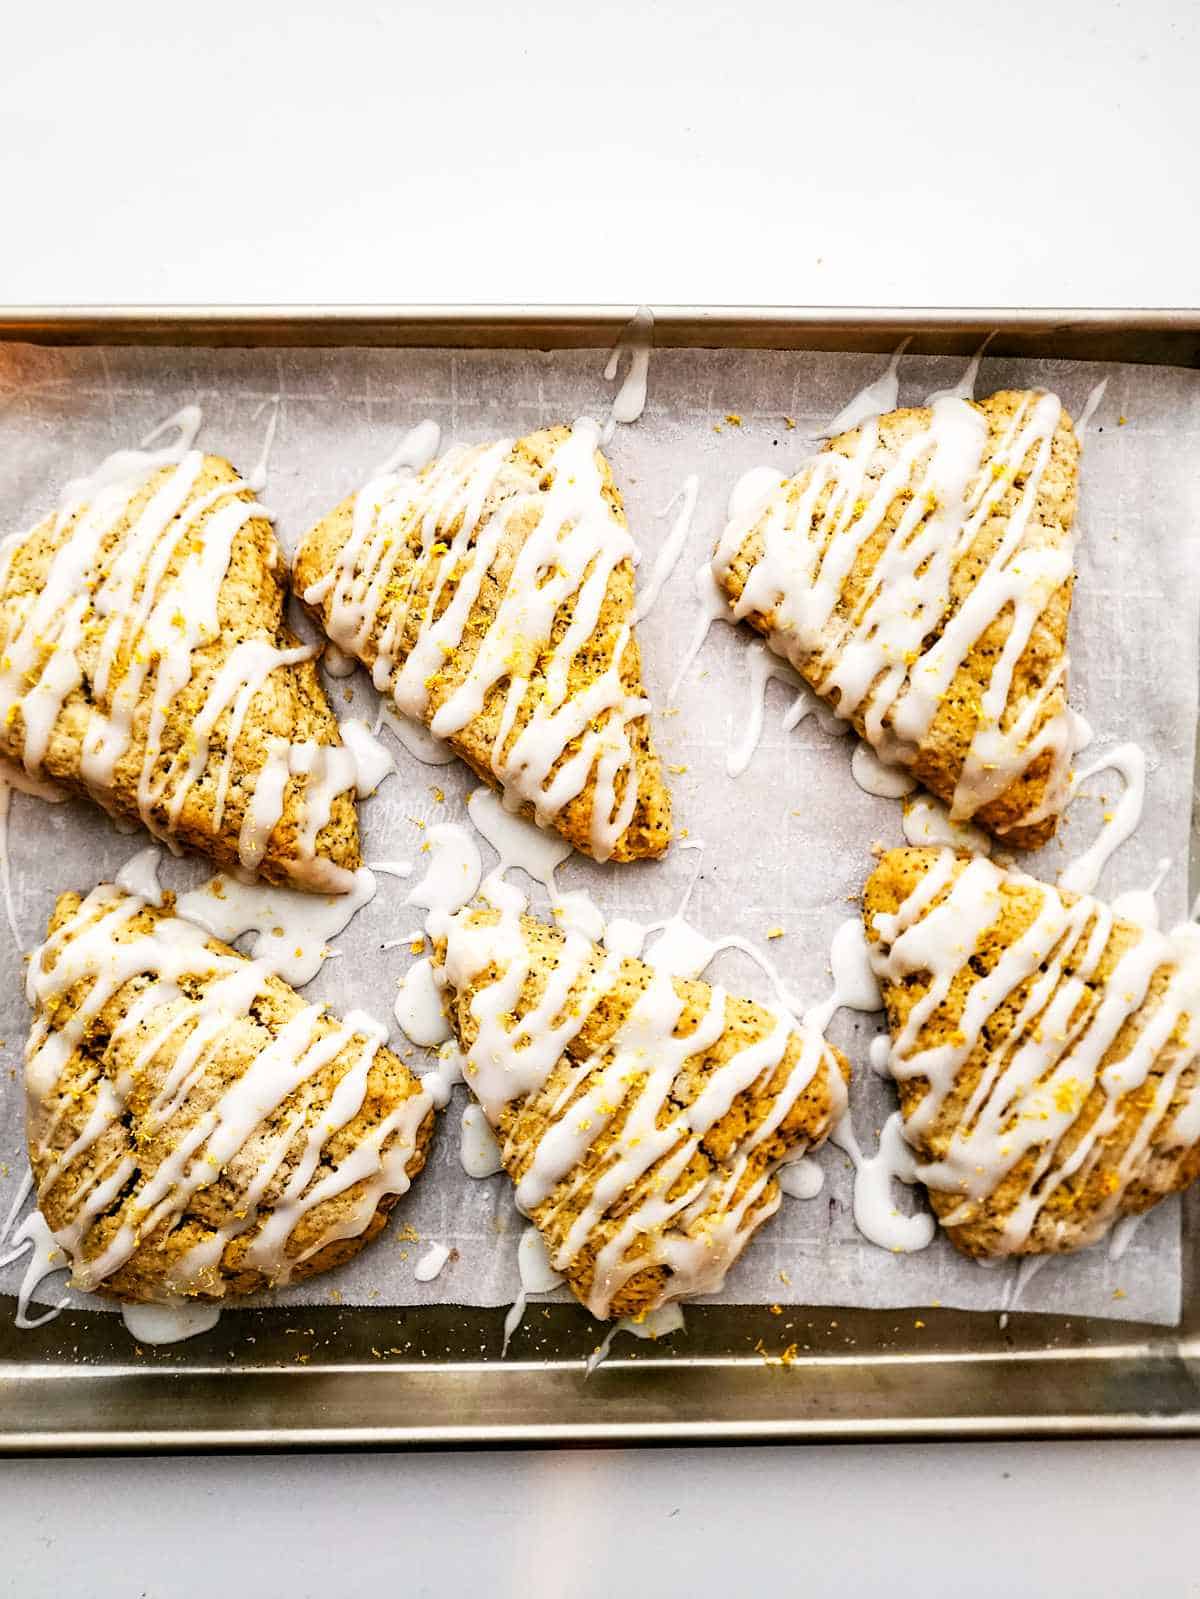 icing drizzled over baked wedge shaped scones.